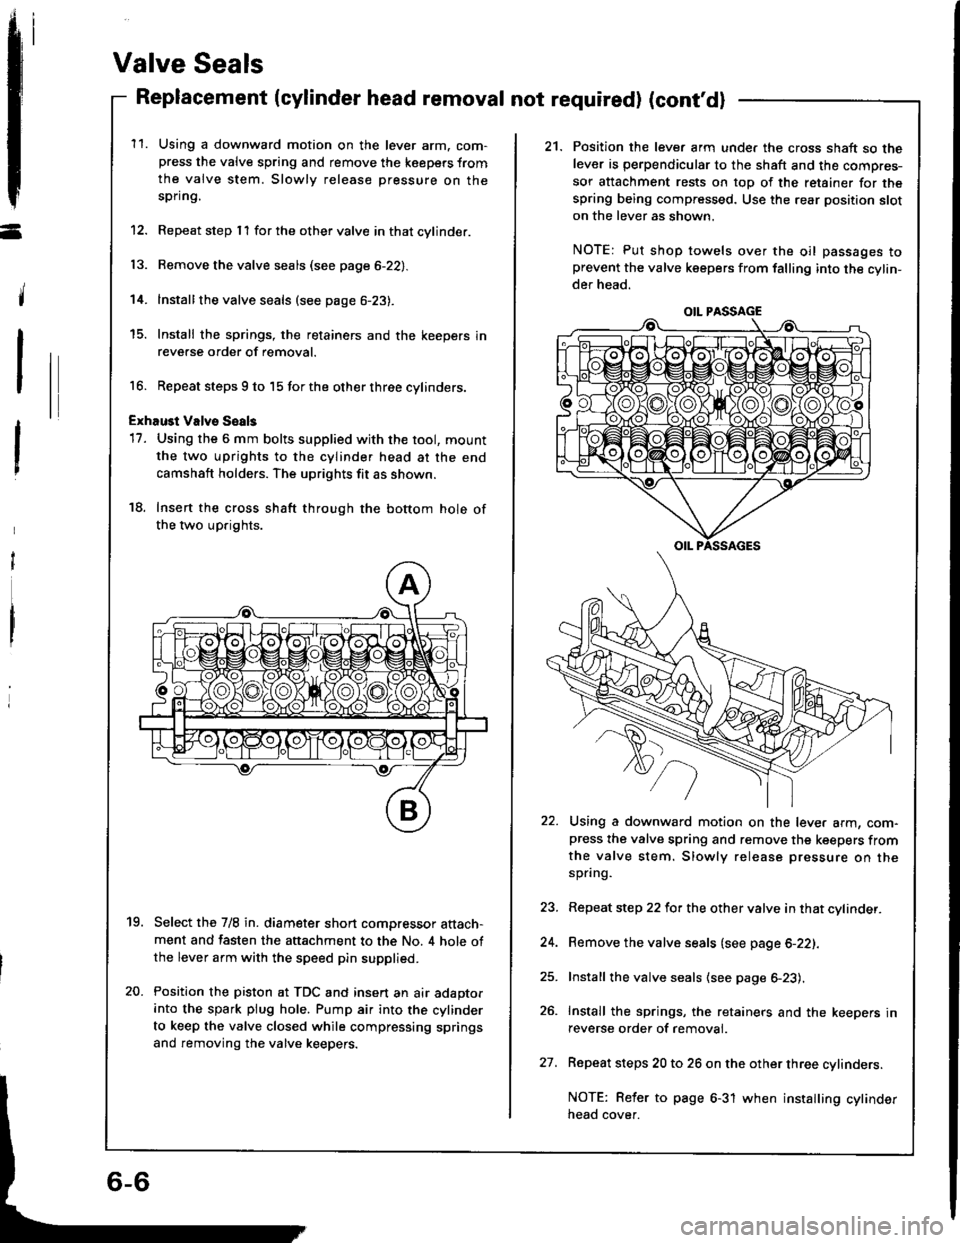 HONDA INTEGRA 1994 4.G Workshop Manual -
14.
Valve Seals
Replacement (cylinder head removal not required) (contdl
11.Using a downward motion on the lever arm. com-press the valve spring and remove the keepers from
the valve stem. Slowly